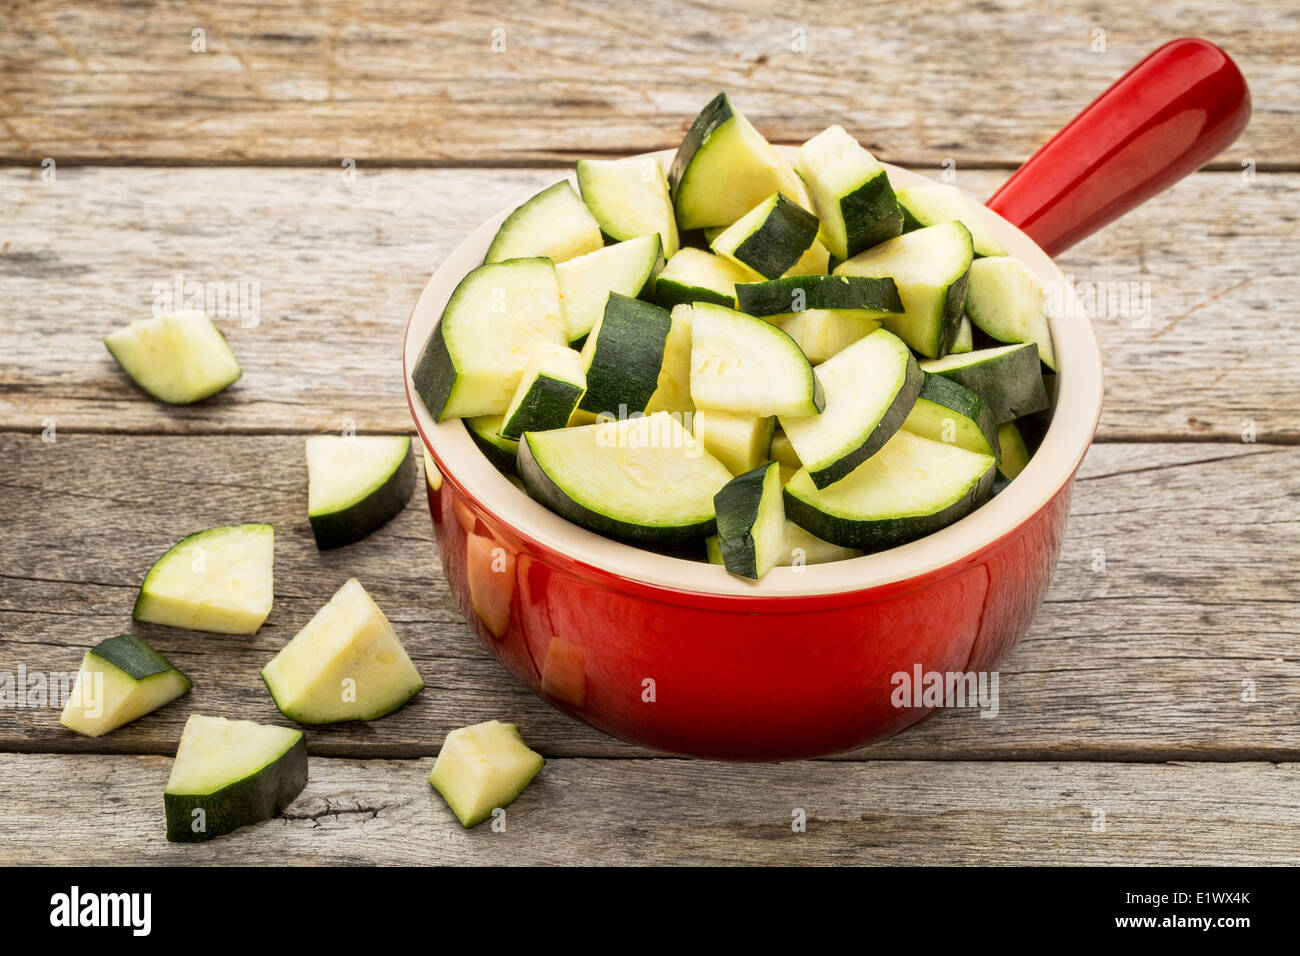 diced and sliced zucchini in red stoneware pot against rustic wooden table Stock Photo